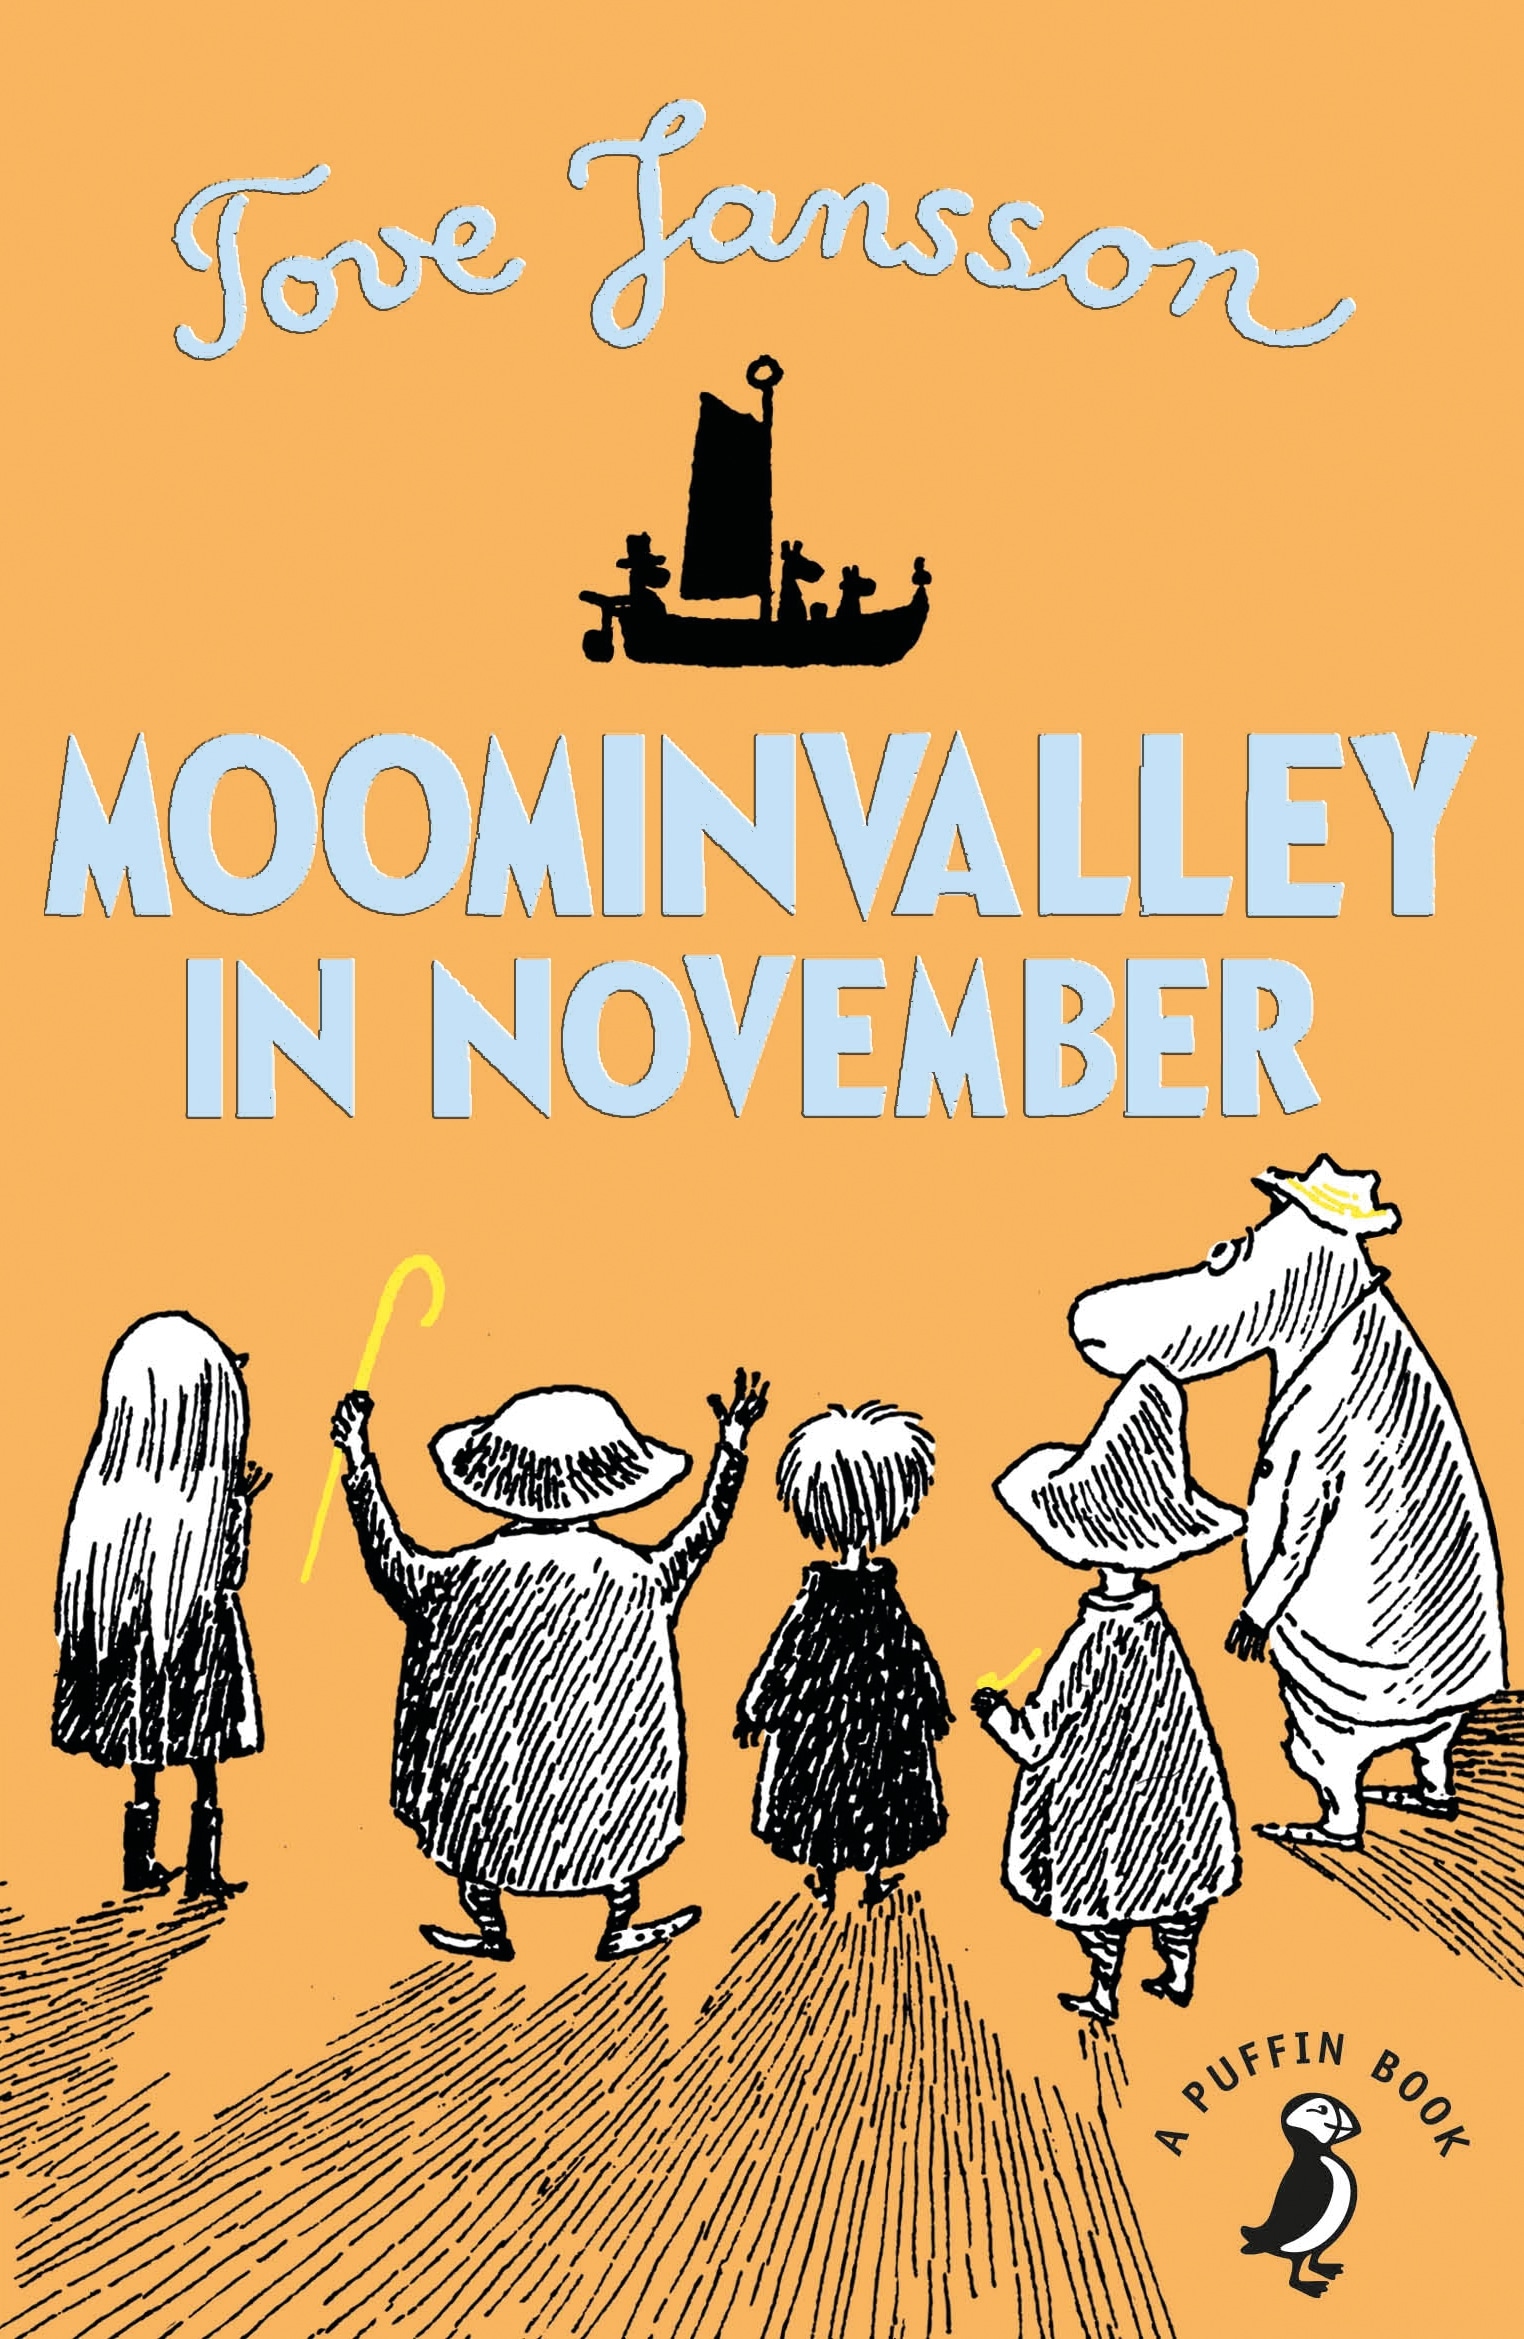 Book “Moominvalley in November” by Tove Jansson — February 7, 2019